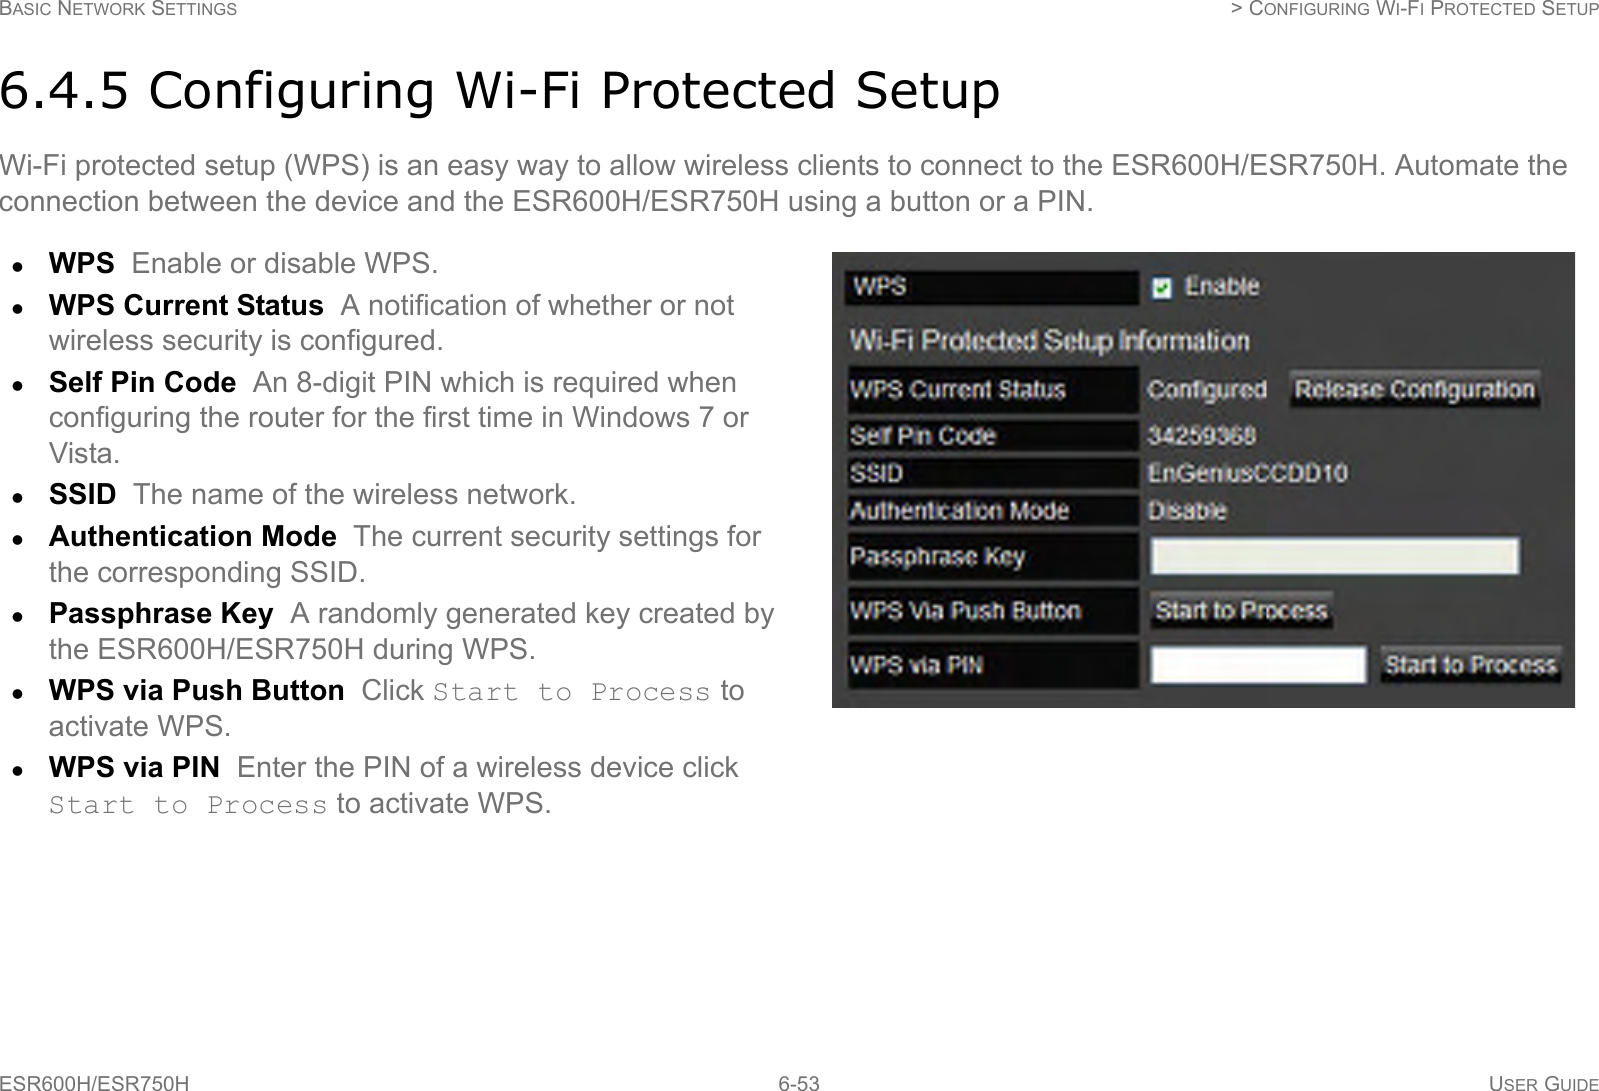 BASIC NETWORK SETTINGS  &gt; CONFIGURING WI-FI PROTECTED SETUPESR600H/ESR750H 6-53 USER GUIDE6.4.5 Configuring Wi-Fi Protected SetupWi-Fi protected setup (WPS) is an easy way to allow wireless clients to connect to the ESR600H/ESR750H. Automate the connection between the device and the ESR600H/ESR750H using a button or a PIN.WPS  Enable or disable WPS.WPS Current Status  A notification of whether or not wireless security is configured.Self Pin Code  An 8-digit PIN which is required when configuring the router for the first time in Windows 7 or Vista.SSID  The name of the wireless network.Authentication Mode  The current security settings for the corresponding SSID.Passphrase Key  A randomly generated key created by the ESR600H/ESR750H during WPS.WPS via Push Button  Click Start to Process to activate WPS.WPS via PIN  Enter the PIN of a wireless device click Start to Process to activate WPS.